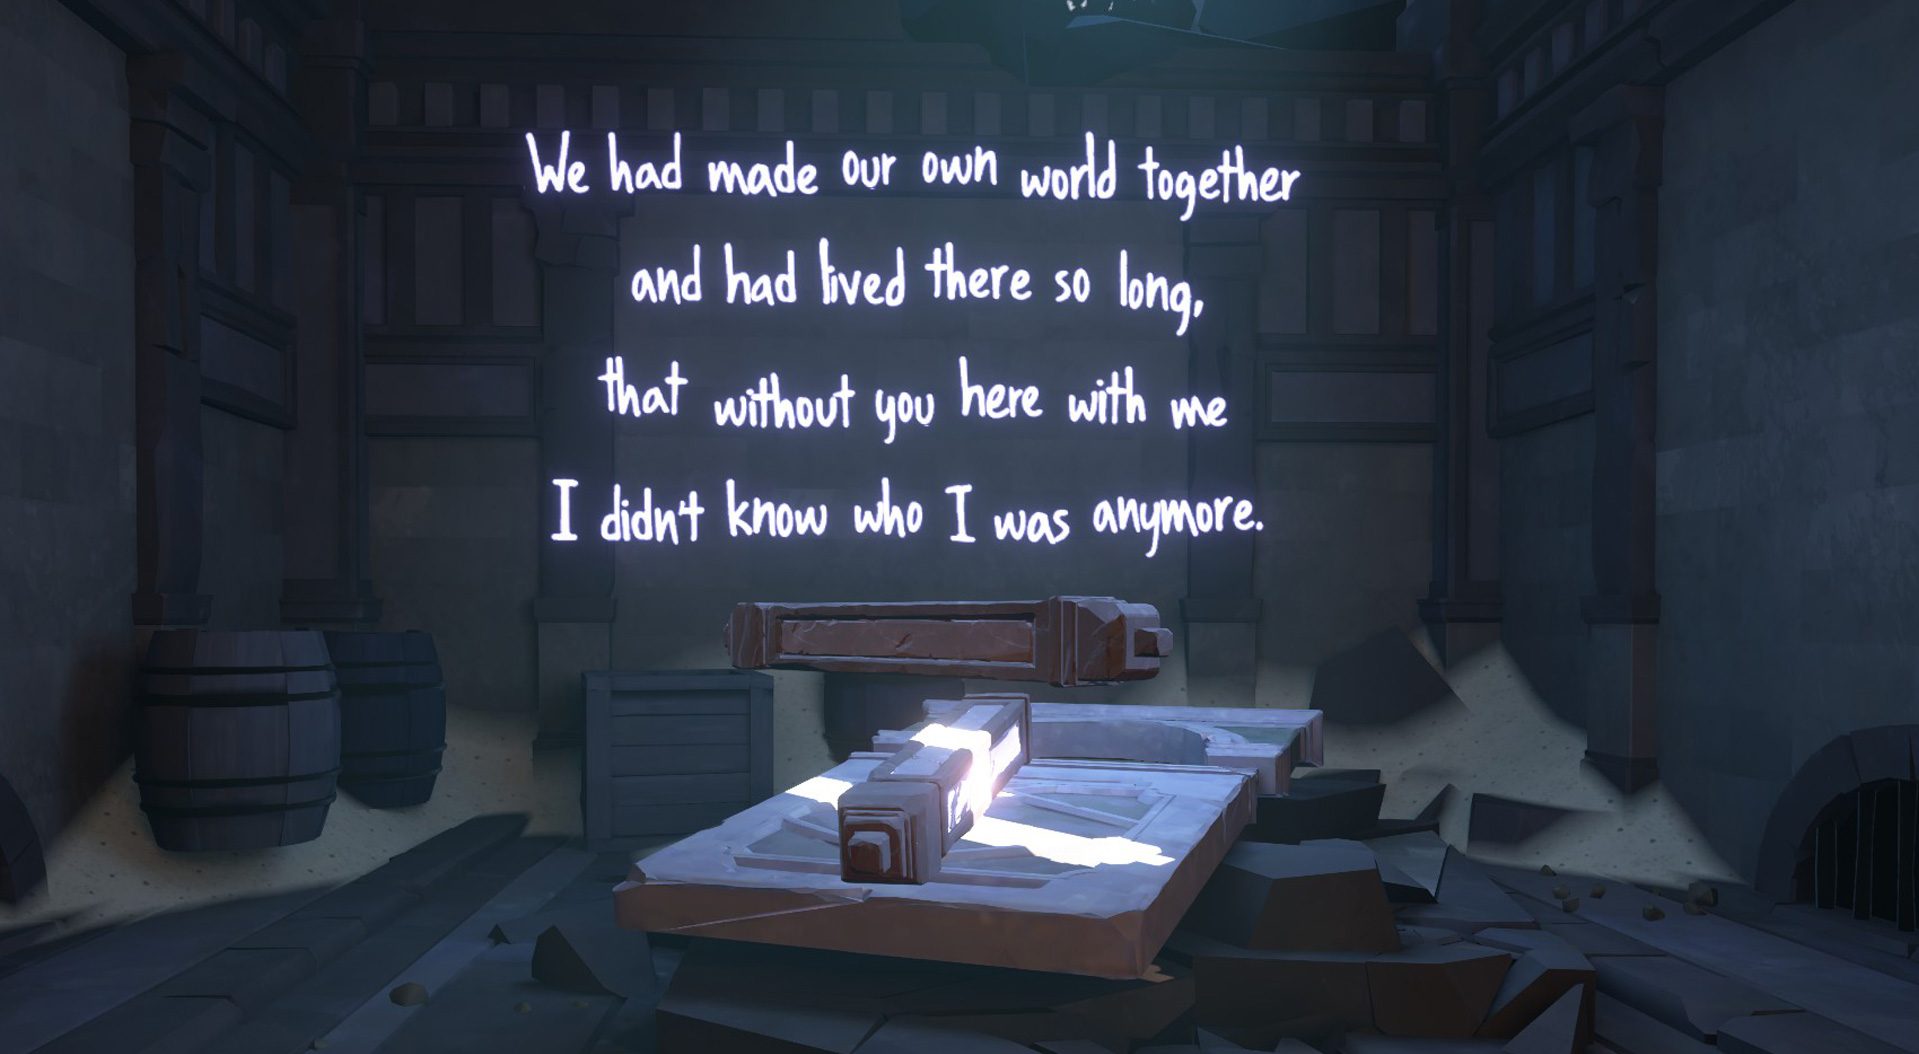 A dark room is pictured with a beam of light shining diagonally across a flat table. Illuminated white neon text is show against a wall. It reads "We had made our own world together and had lived there so long, that without you here with me I didn't know who i was anymore."